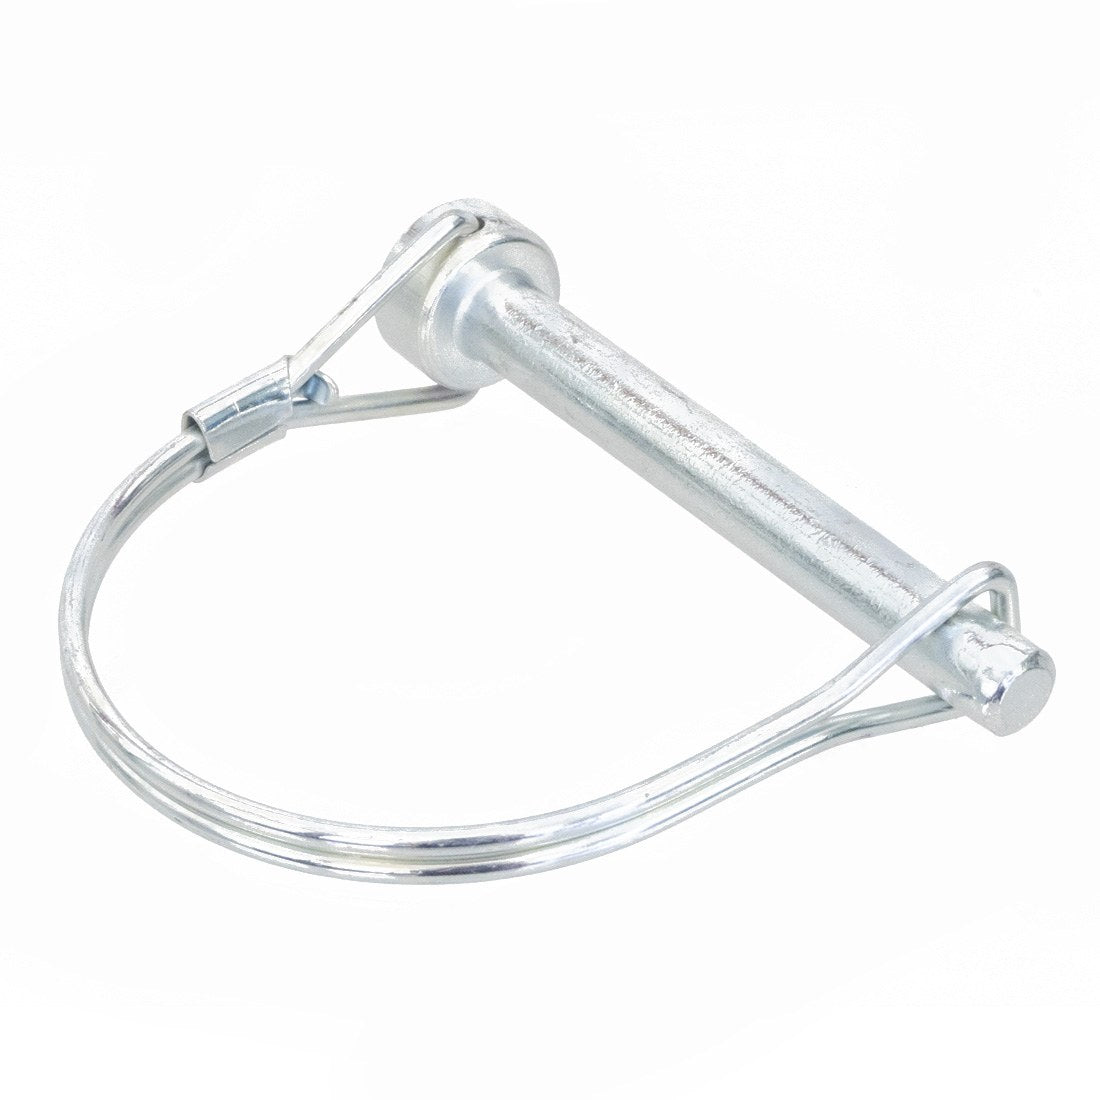 Ladder-Max Multi-Pro Replacement Safety Pins - Pair Angle View